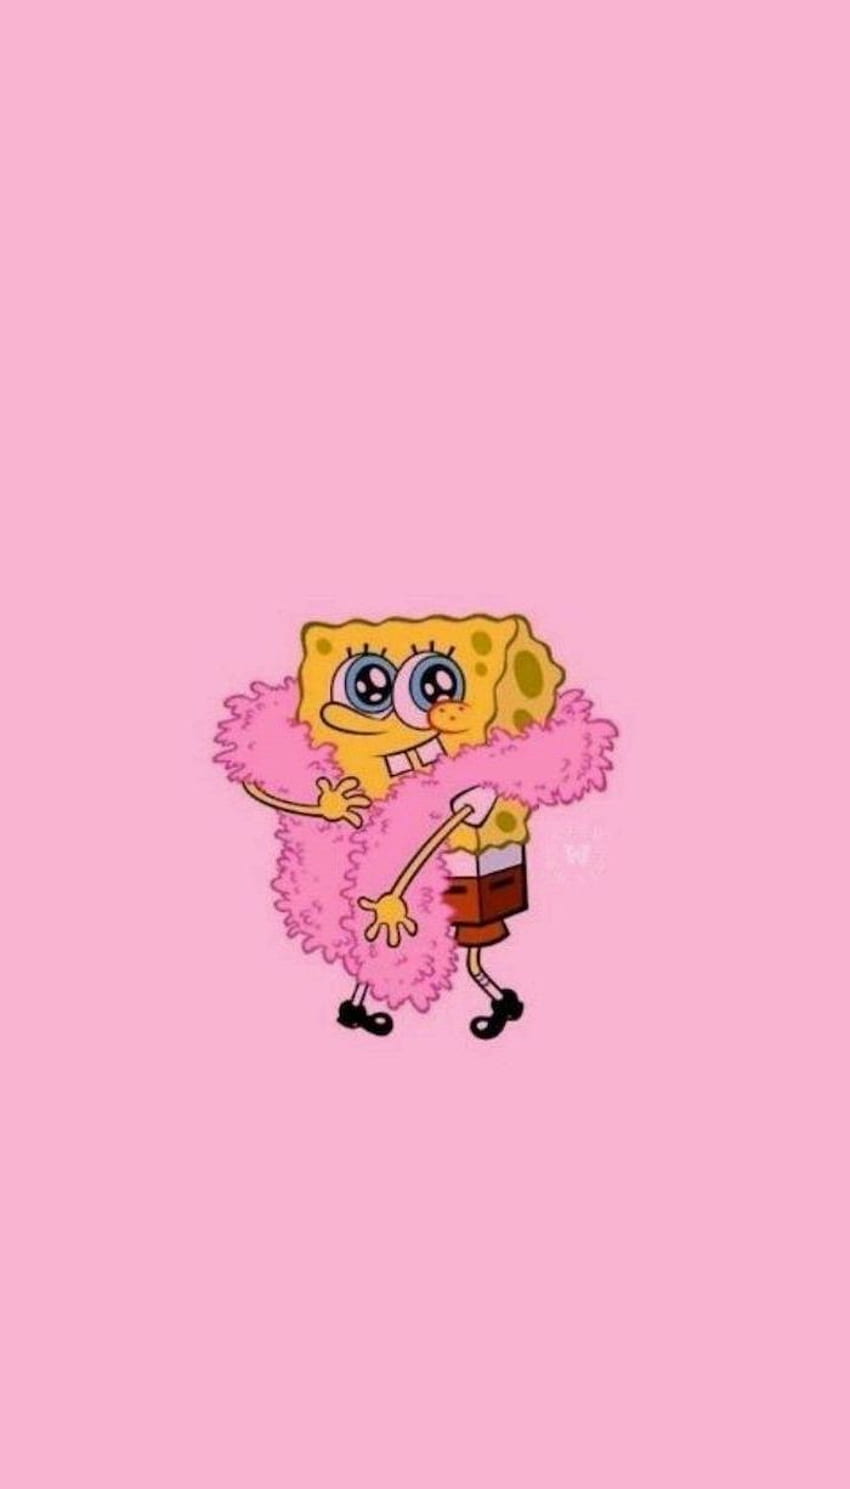 Spongebob squarepants, with a pink sash, on a pink background ...